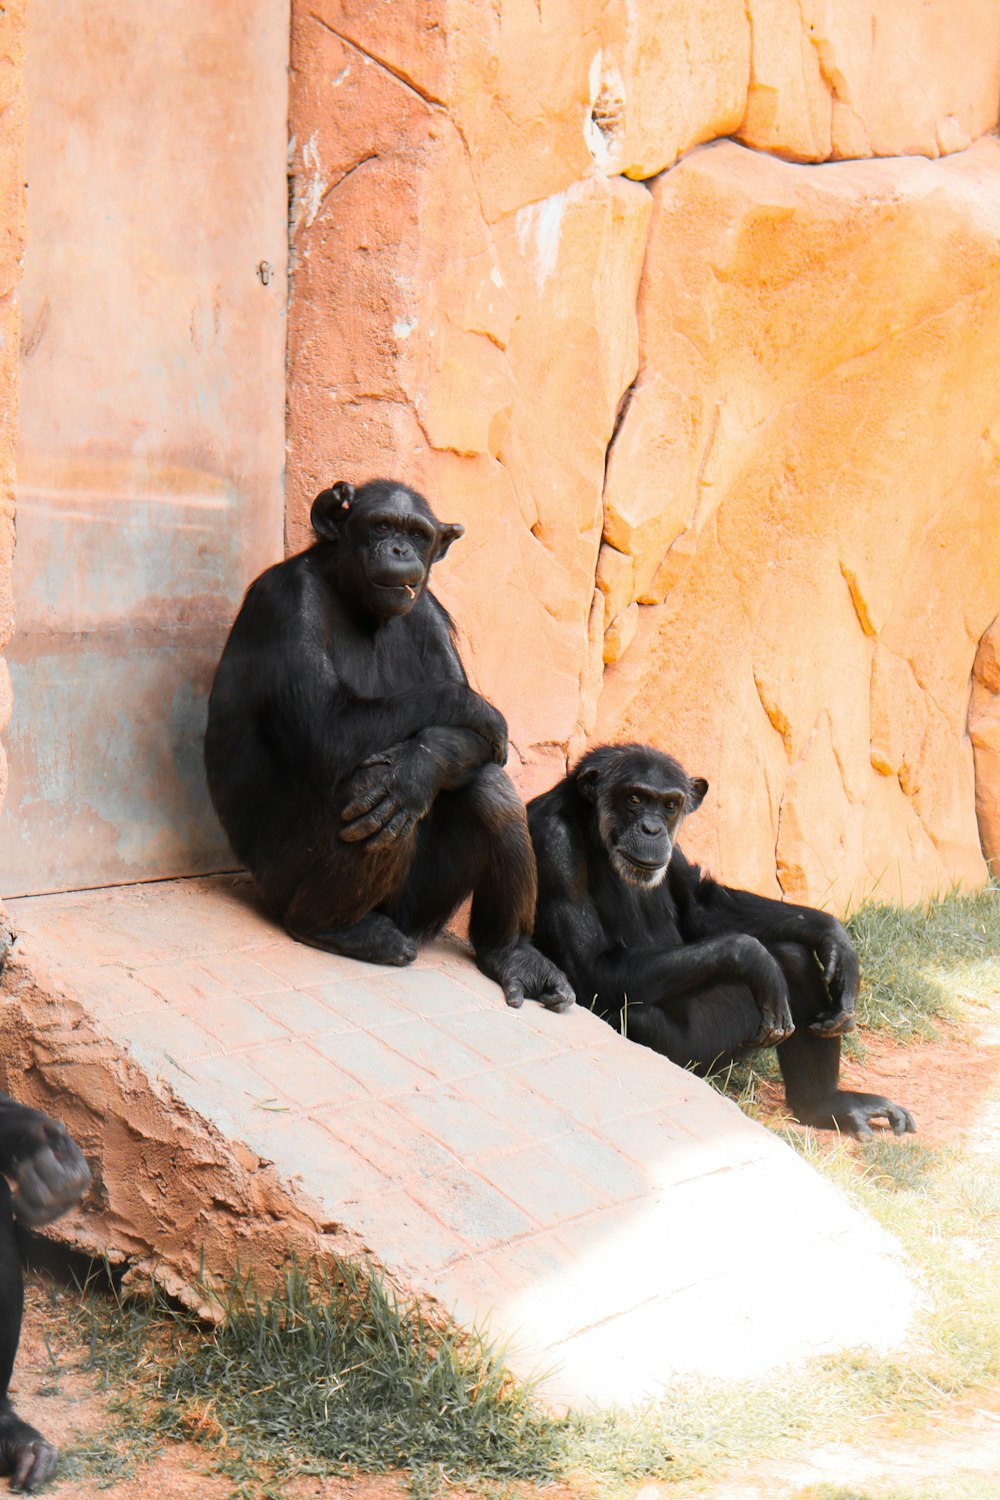 a group of monkeys sitting next to each other